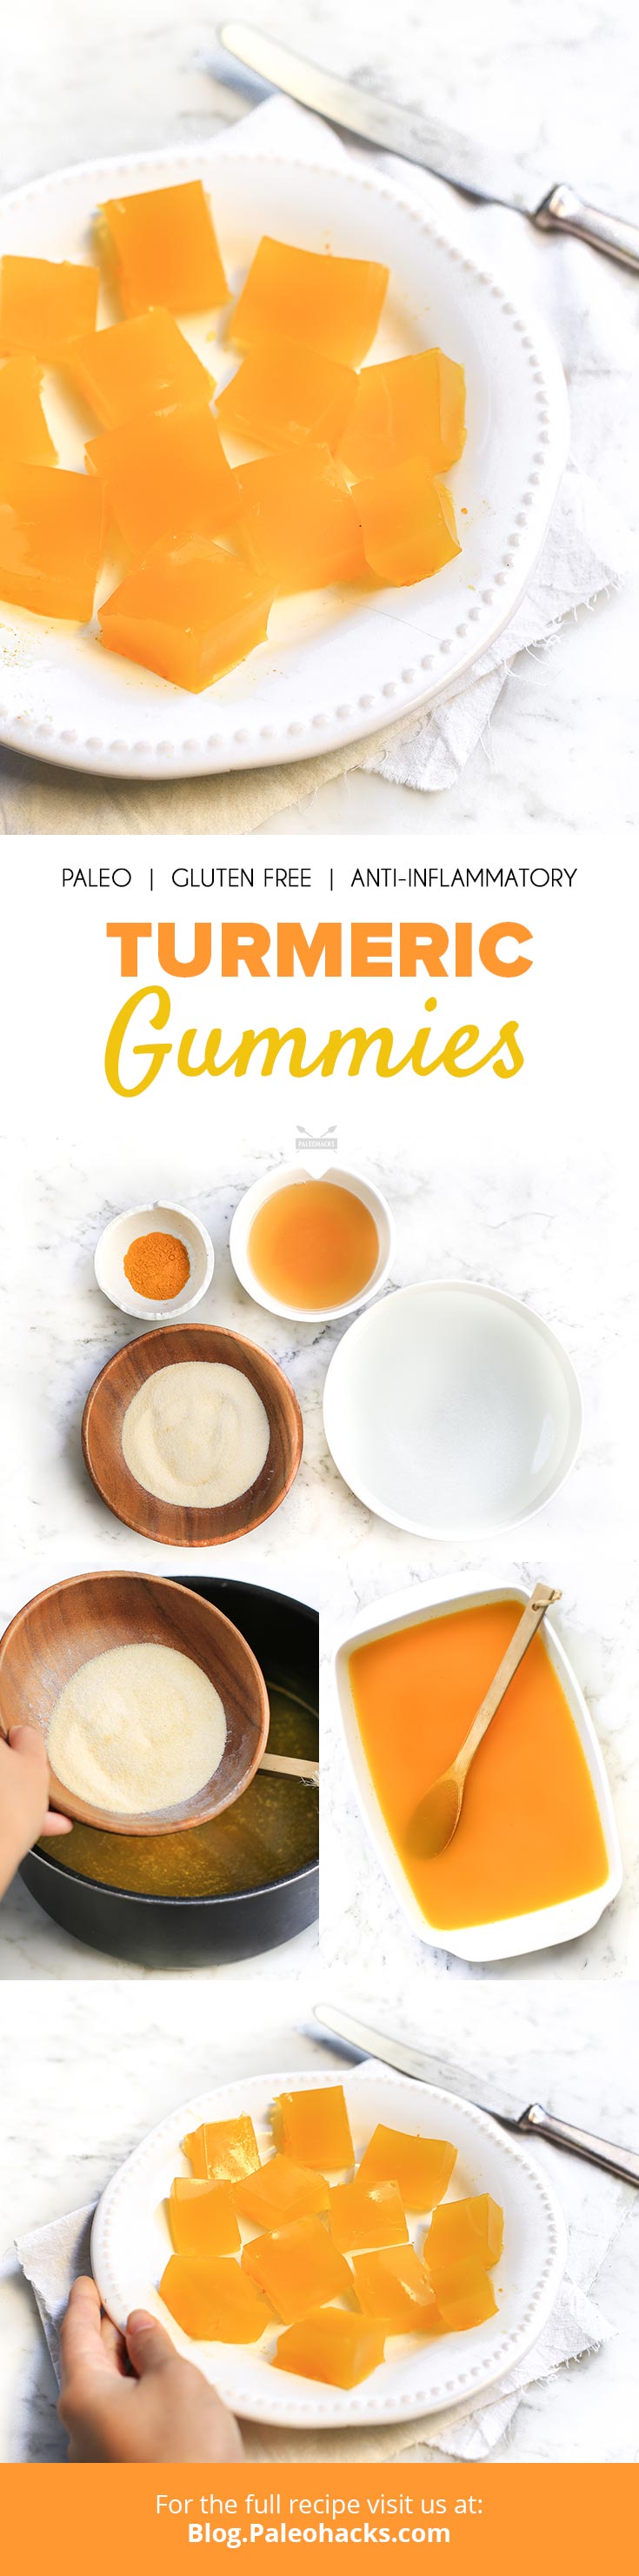 Want to make your own post-dinner vitamins? These bite-sized turmeric gummies are easy to prepare, and full of health benefits!